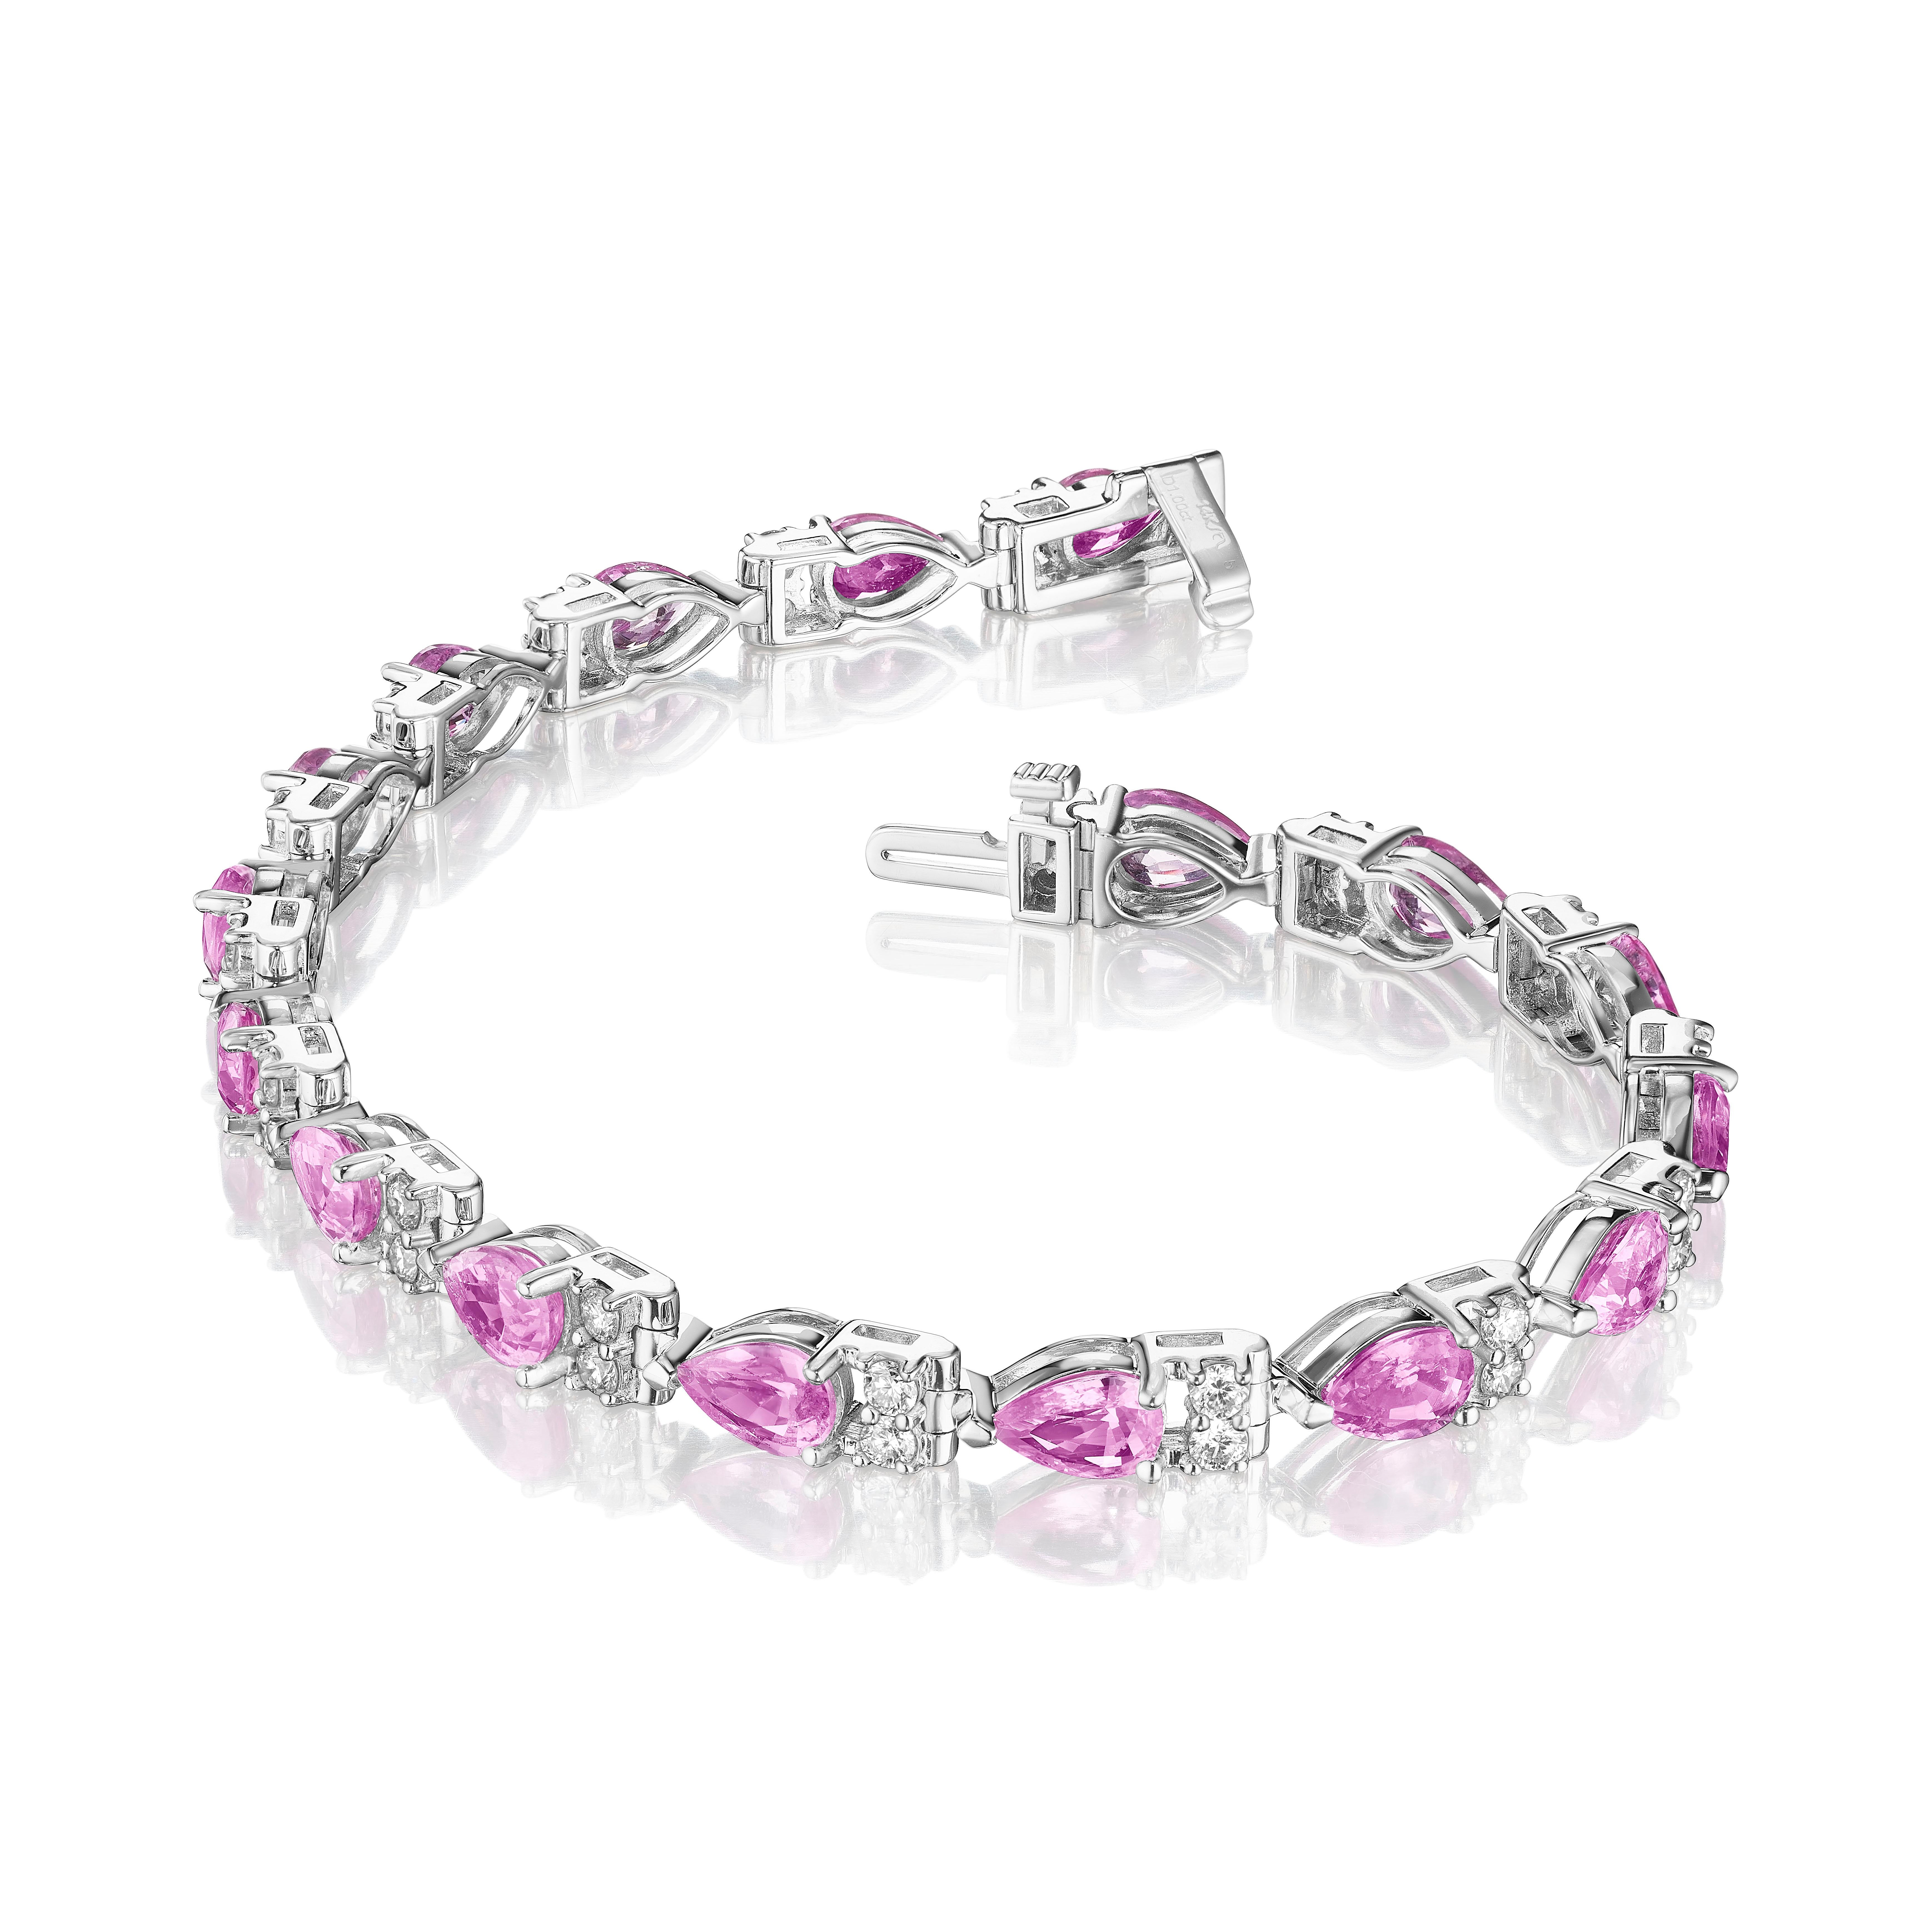 Contemporary 10.50ct Pear Shape Pink Sapphire & Round Diamond Bracelet in 14KT Gold For Sale